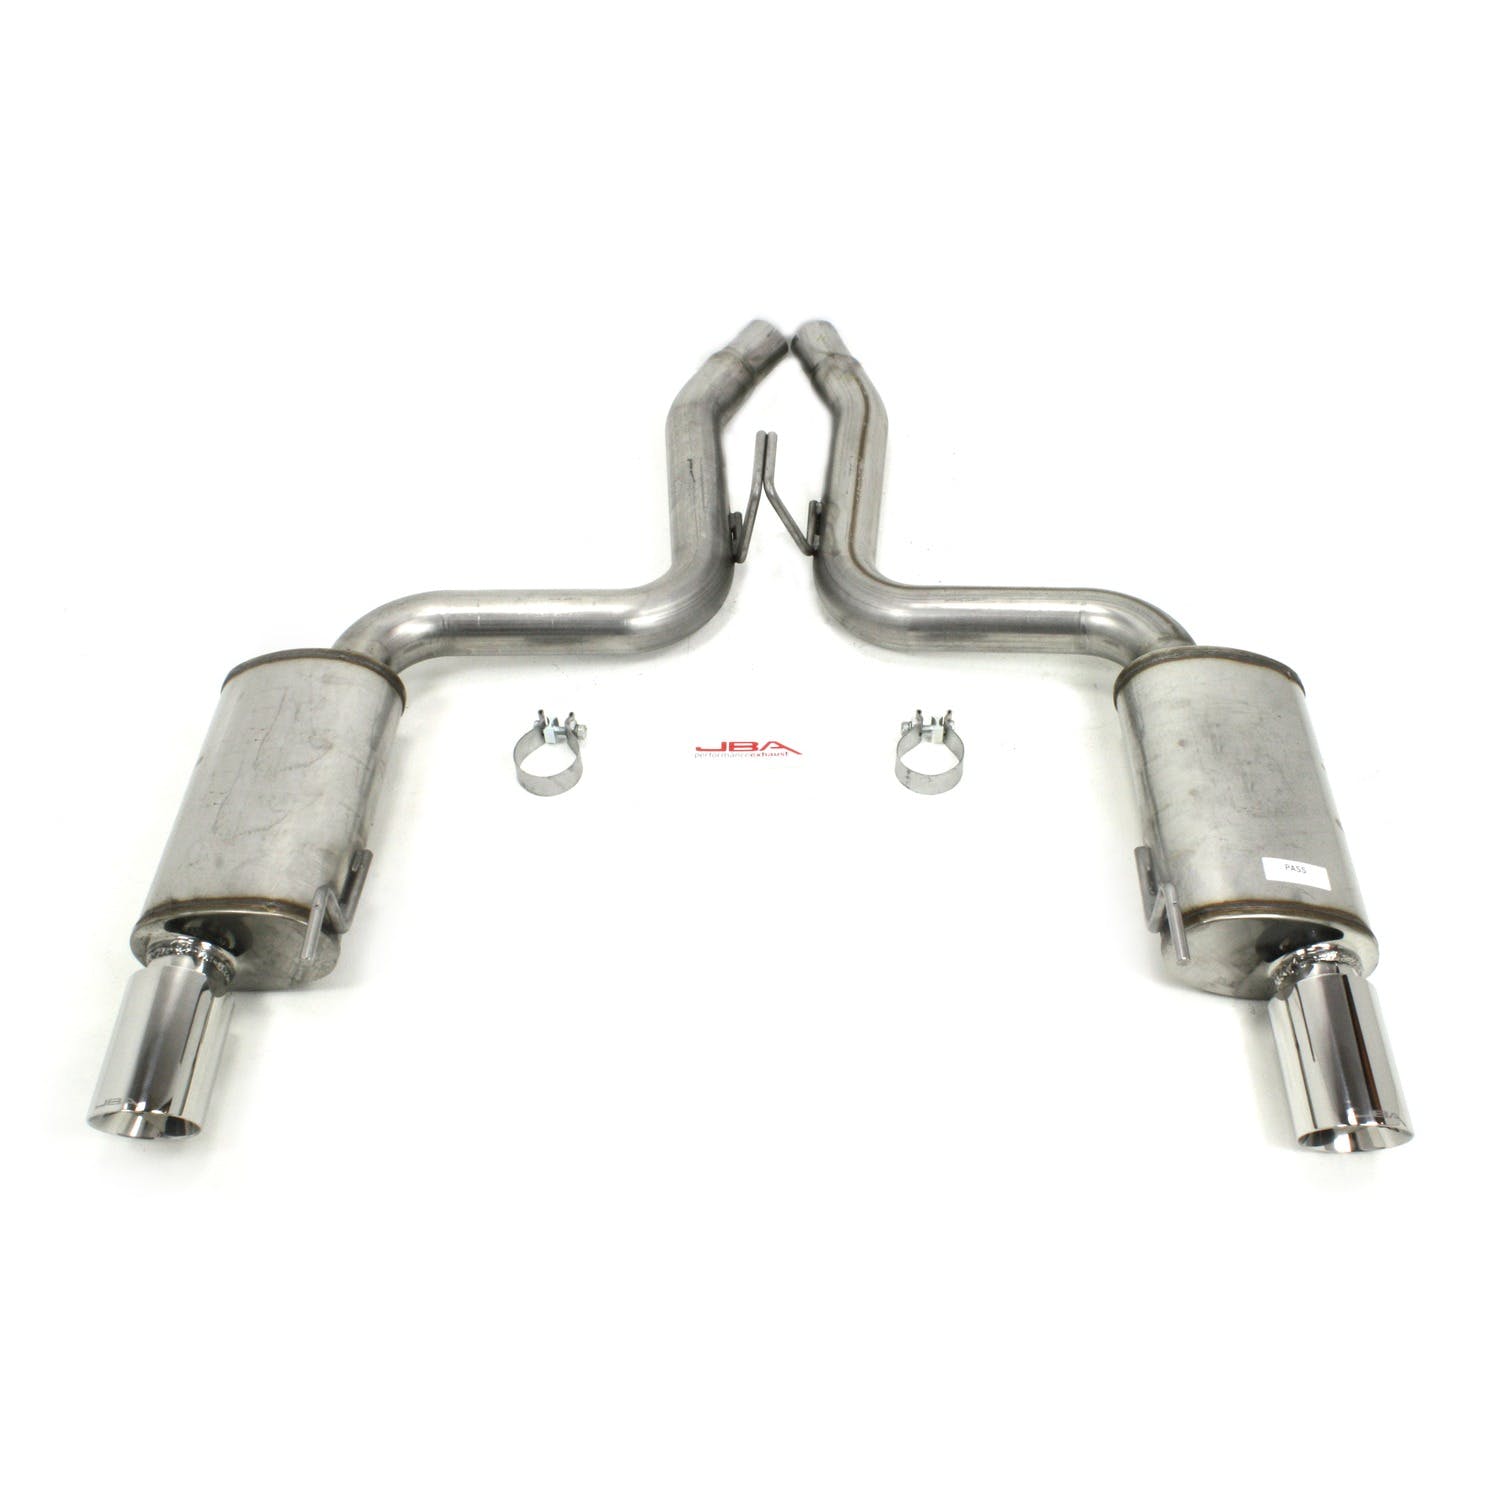 JBA Performance Exhaust 40-2686 2015 Mustang 5.0 2 1/2 inch to 3 inch Axle Back Exhaust